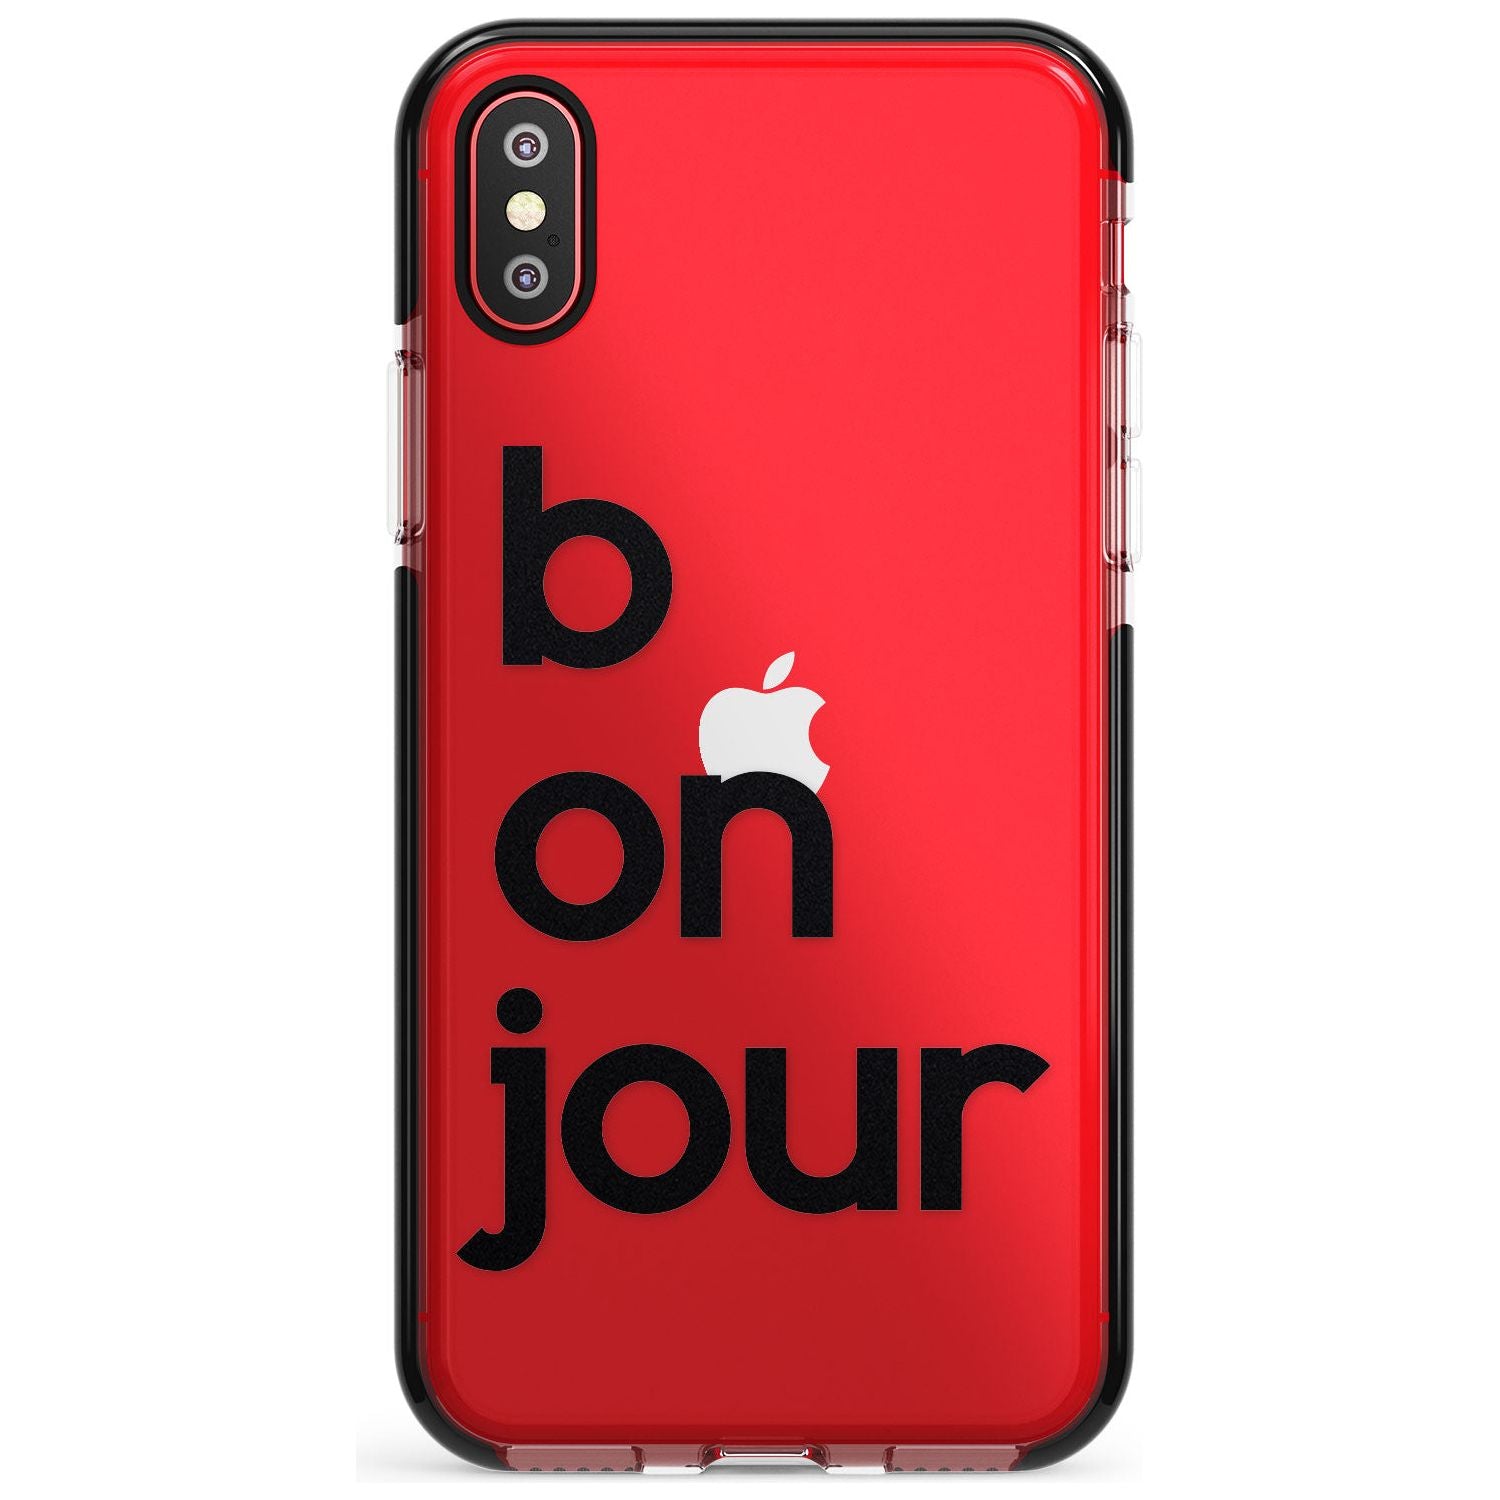 Bonjour Pink Fade Impact Phone Case for iPhone X XS Max XR